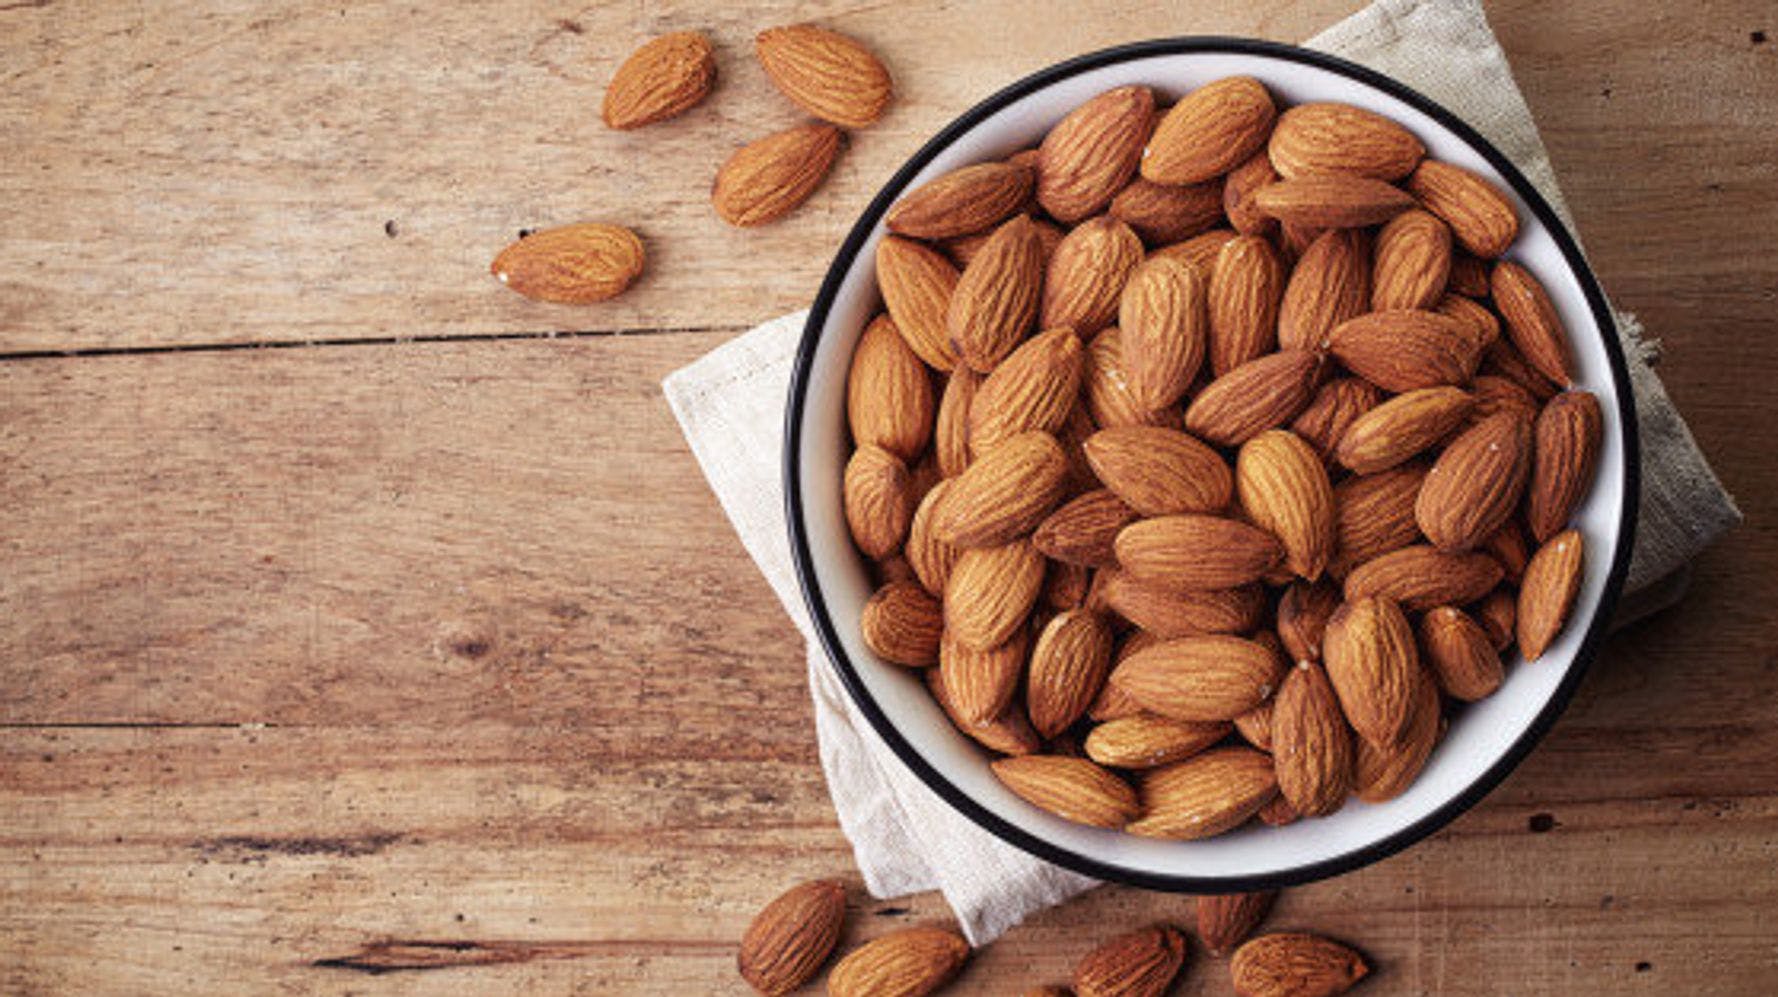  Add Chopped Almonds to Your Food